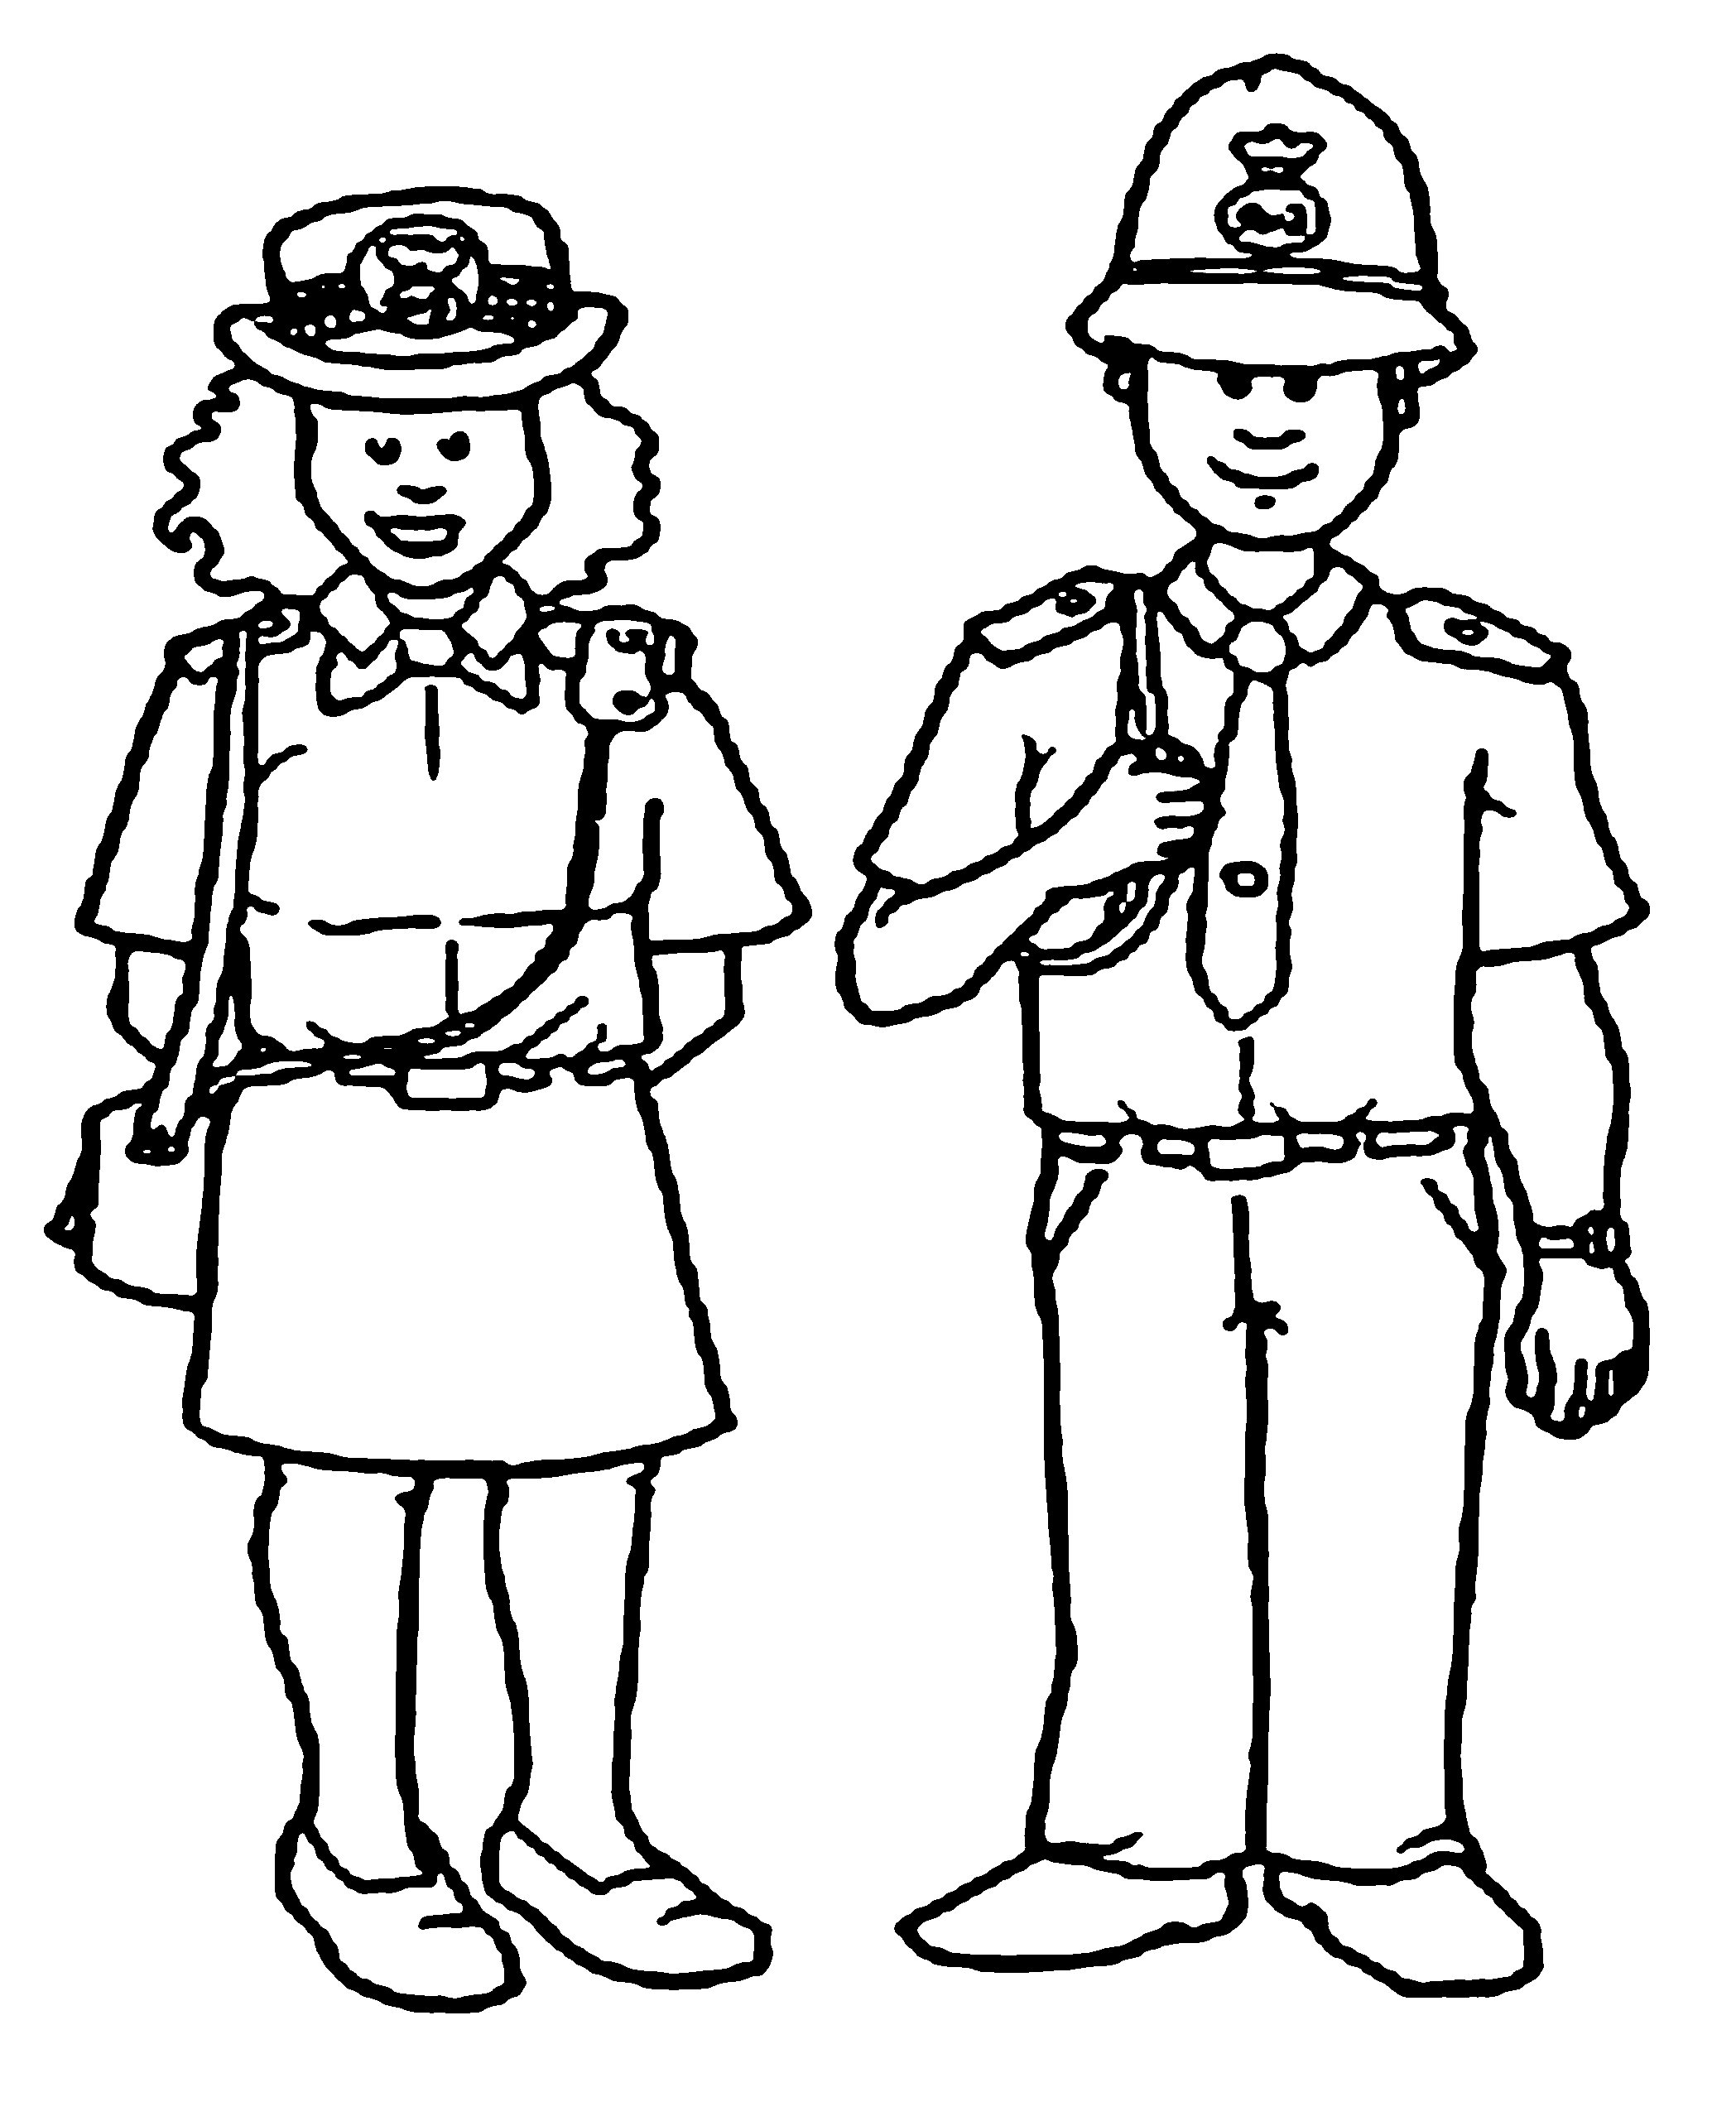 Policeman Coloring Pages - Drawing inspiration